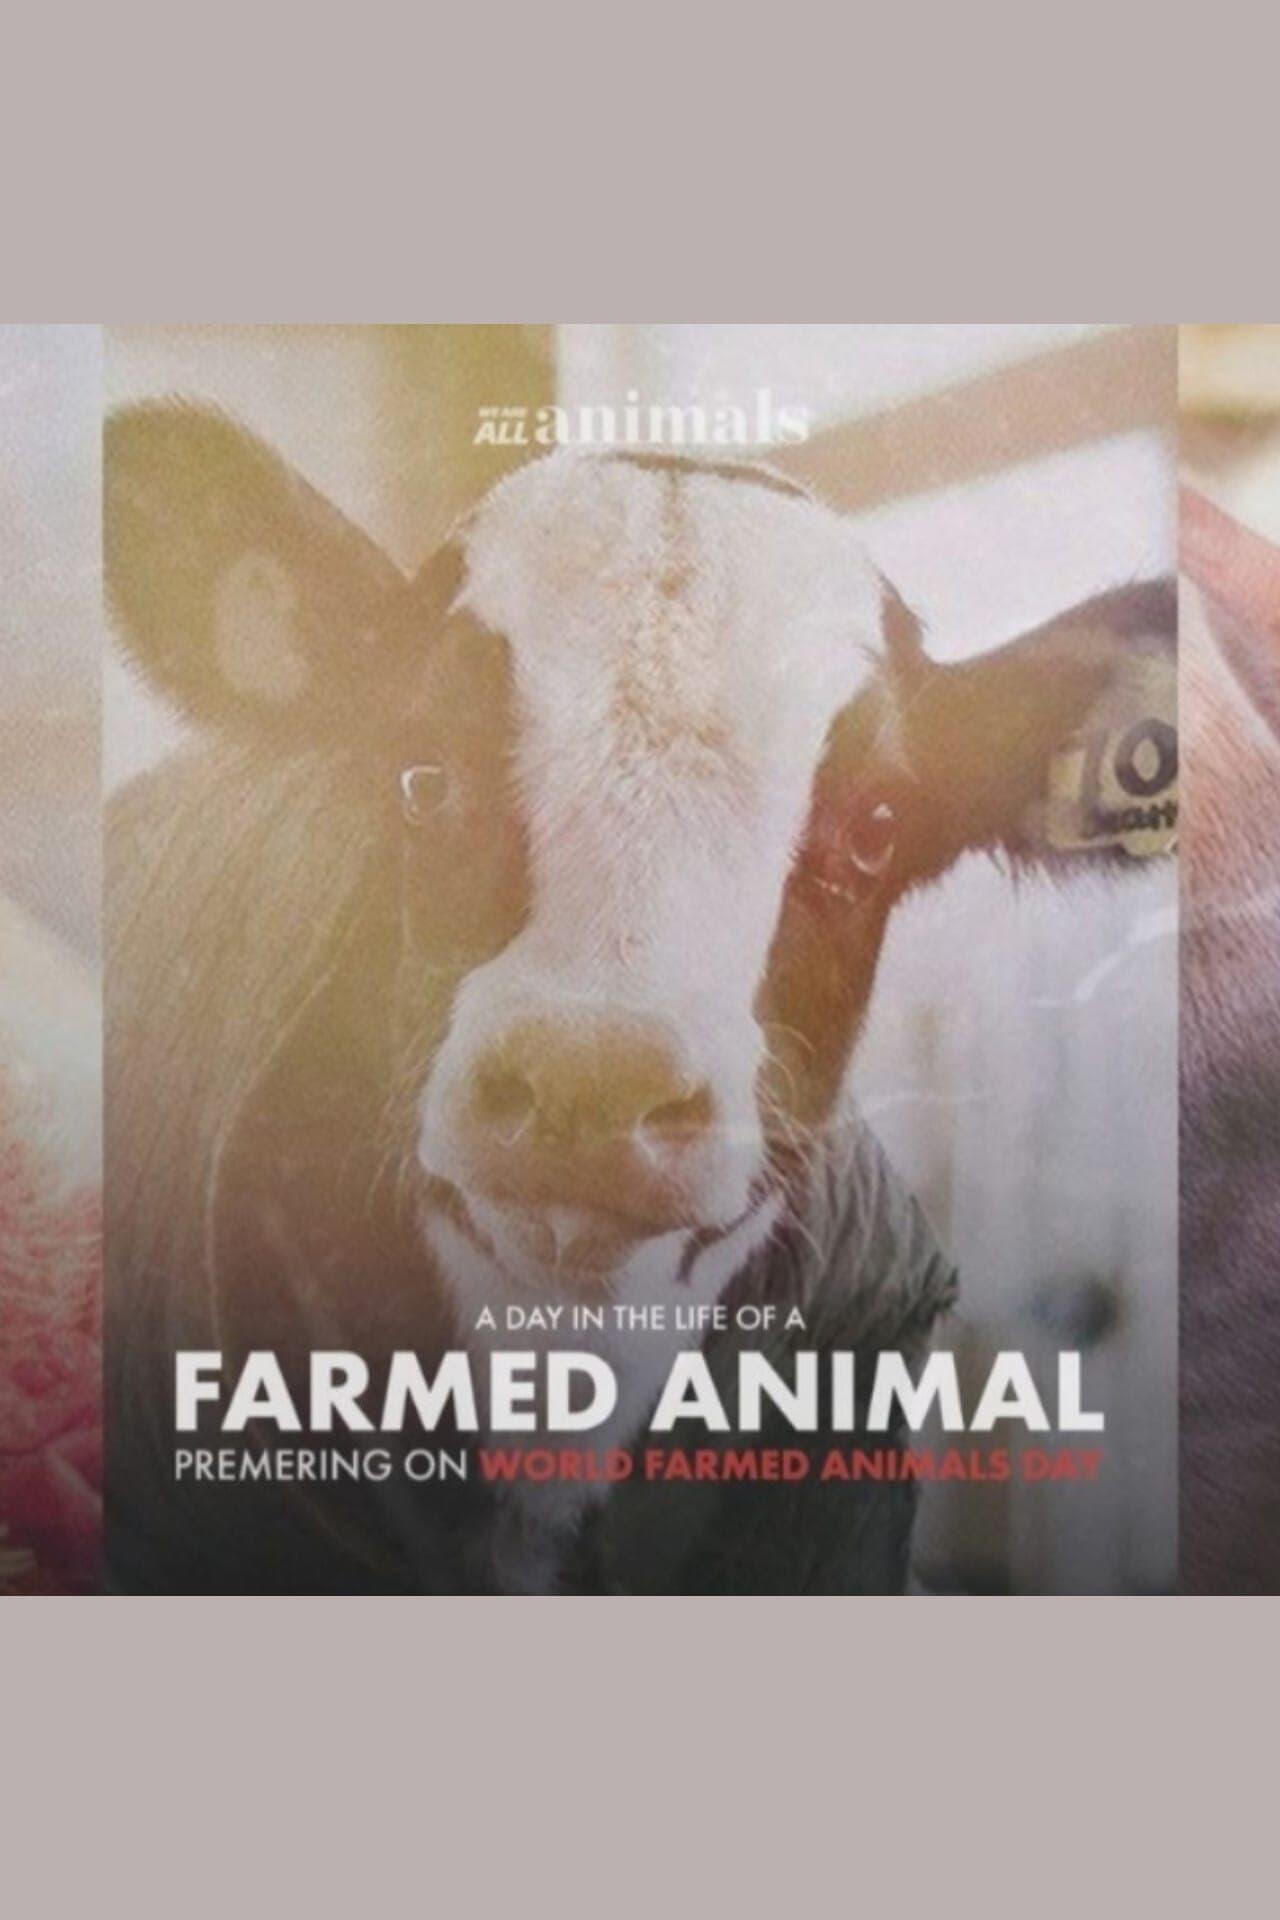 A Day in the Life of a Farmed Animal poster